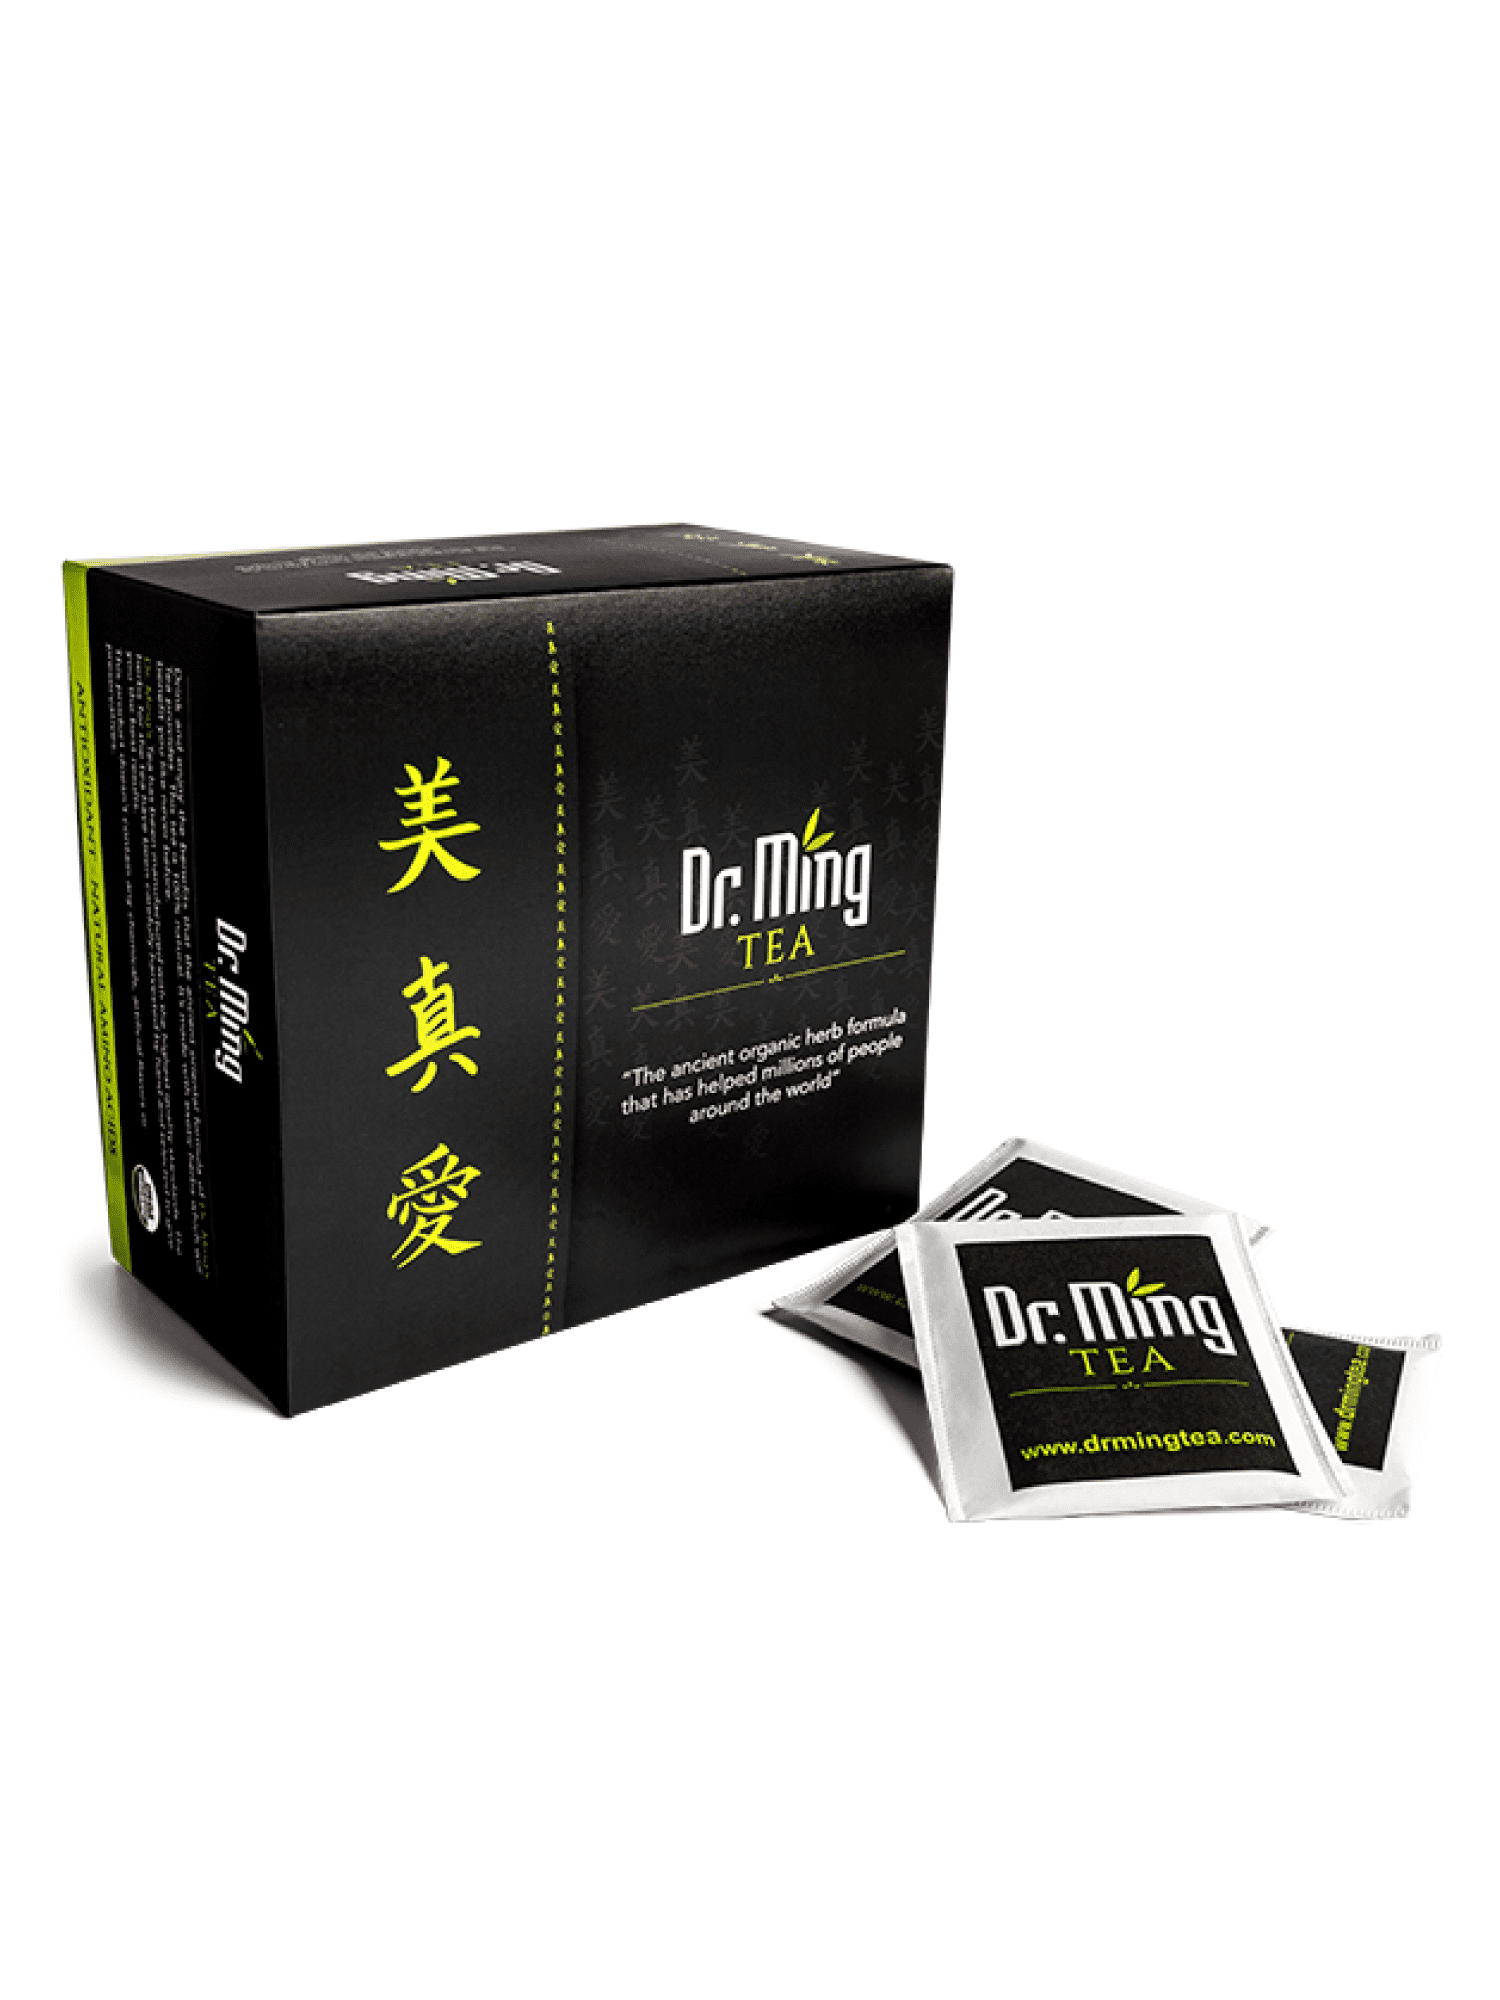 Dr. Ming Tea - The tea pouch with endless benefits! 🍵 Reduce appetite,  lose weight, look great, and feel great with Dr.Ming! . Shop now!  www.drmingtea.com . #Health #Tea #Fitme #Fitness